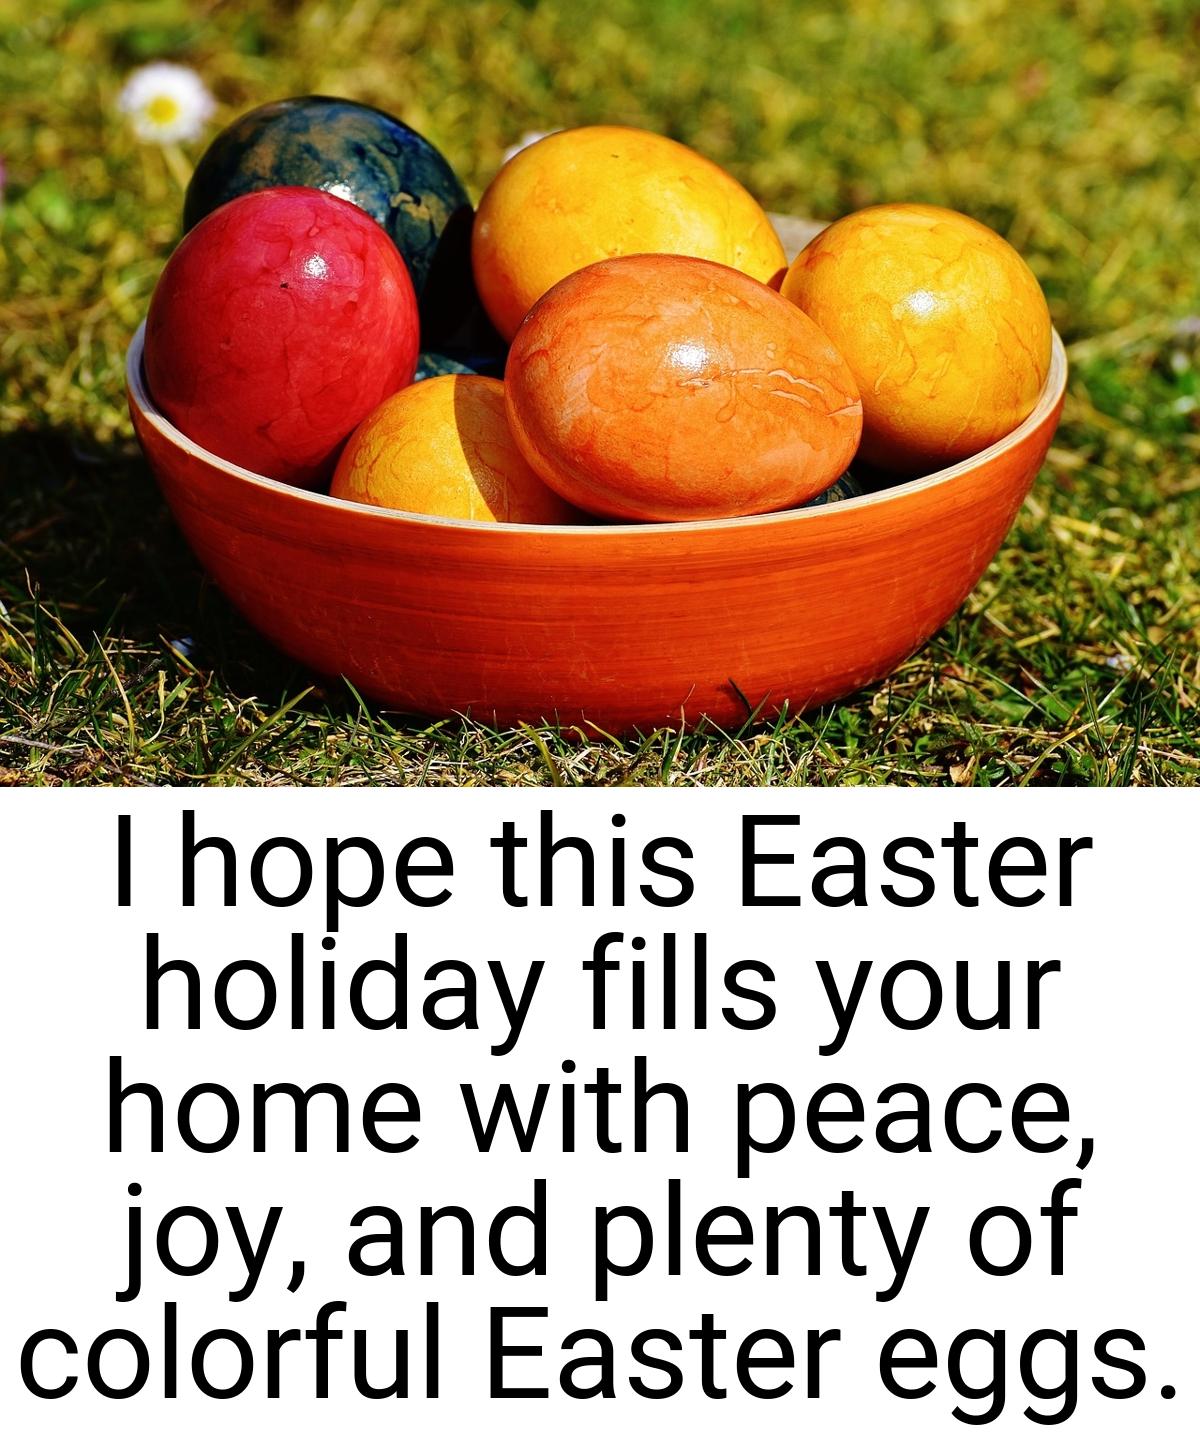 I hope this Easter holiday fills your home with peace, joy